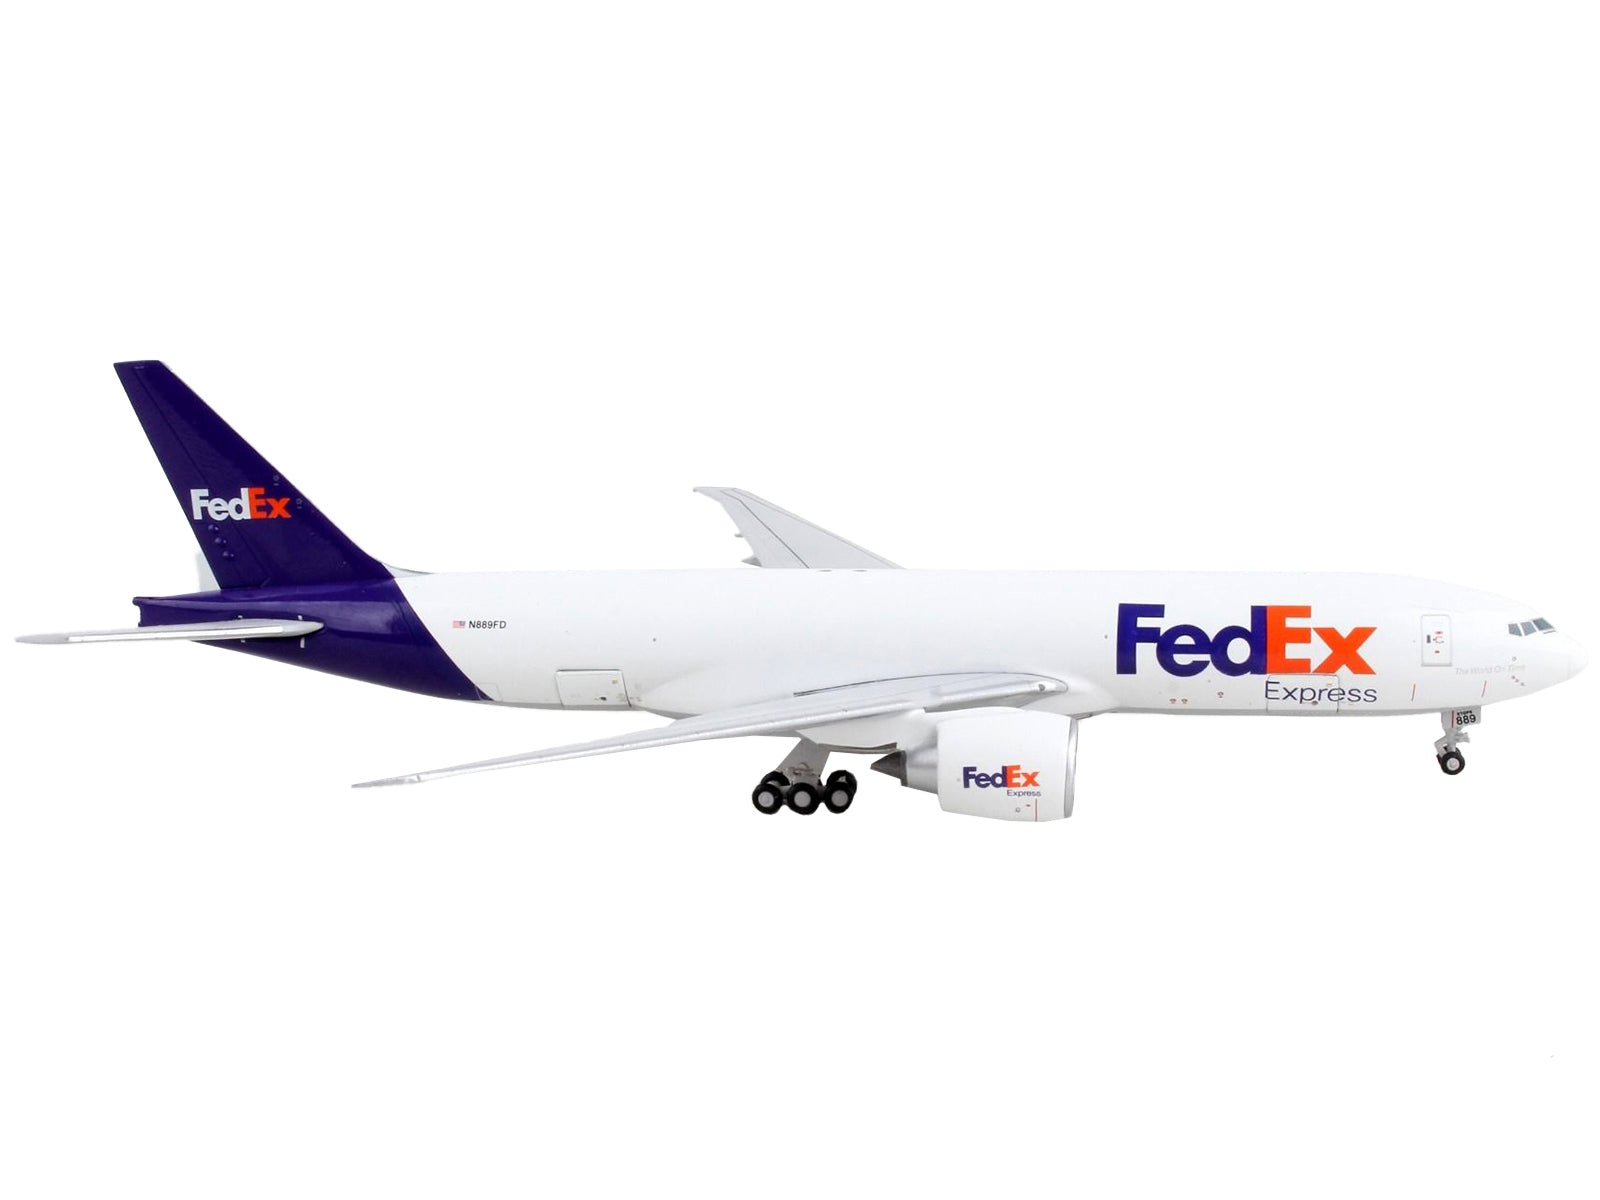 Boeing 777F Commercial Aircraft "Federal Express (Fedex)" White with Purple Tail "Interactive Series" 1/400 Diecast Model Airplane by GeminiJets